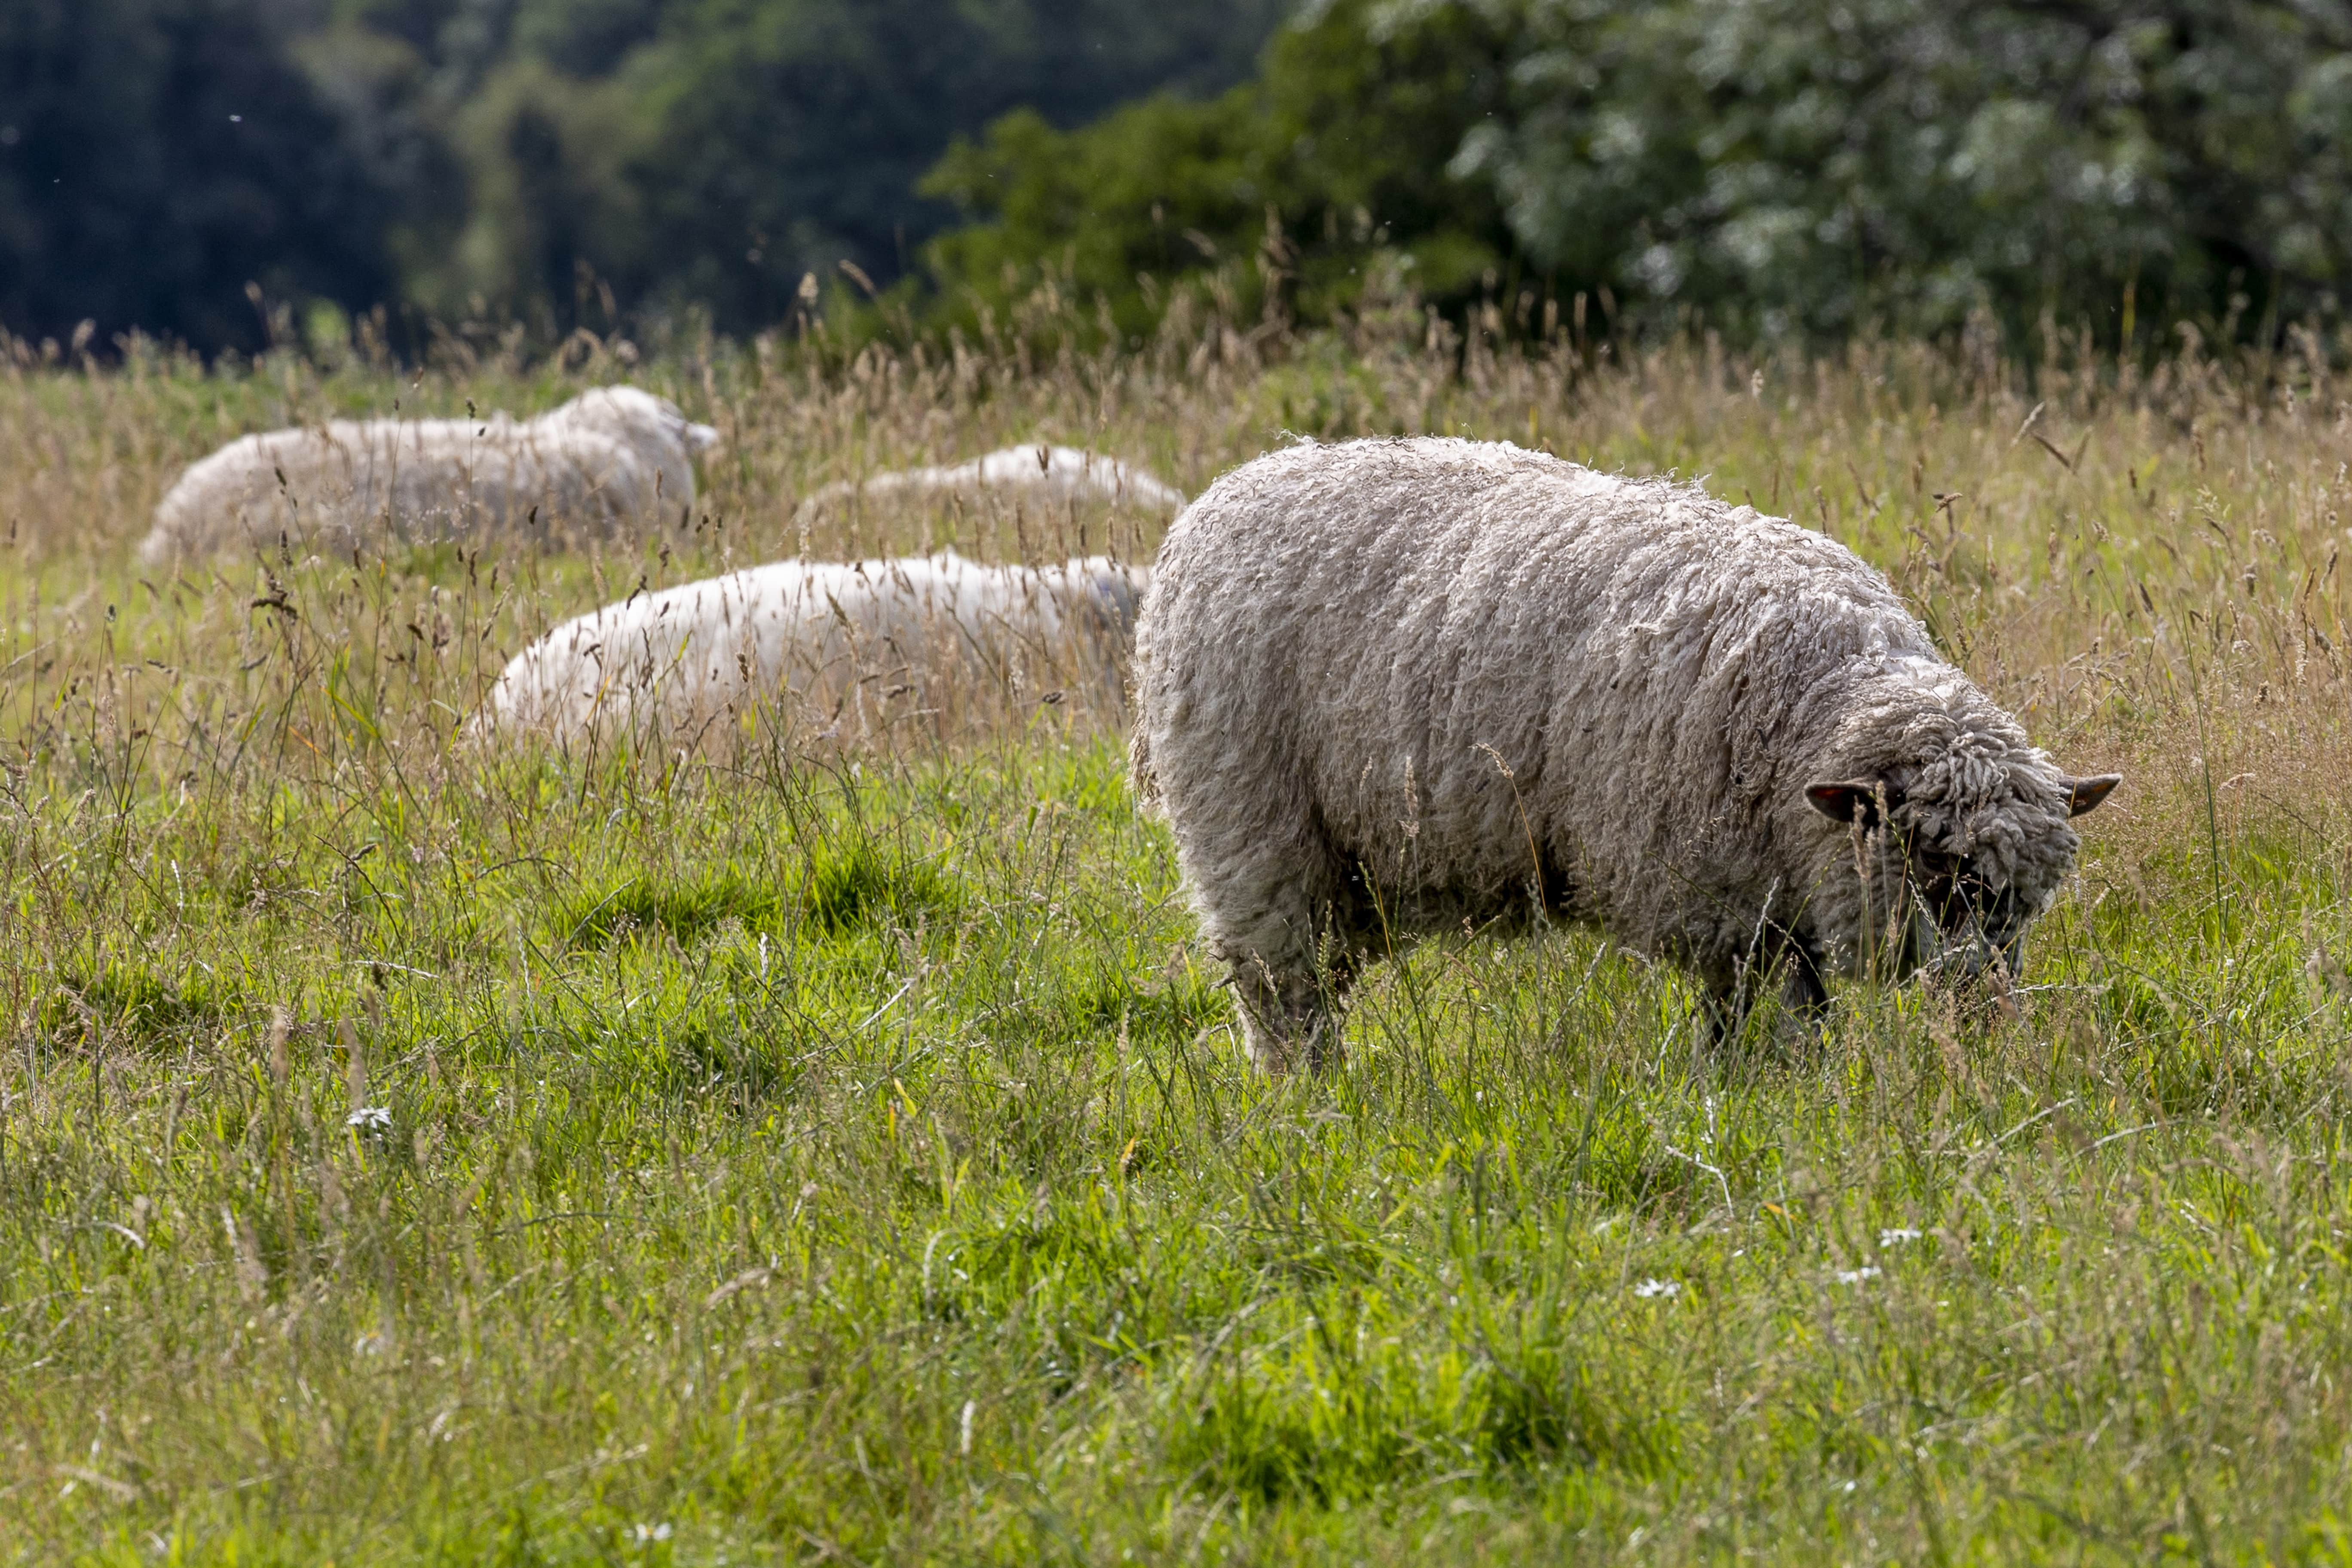 Sheep grazing in field in North Yorkshire, UK